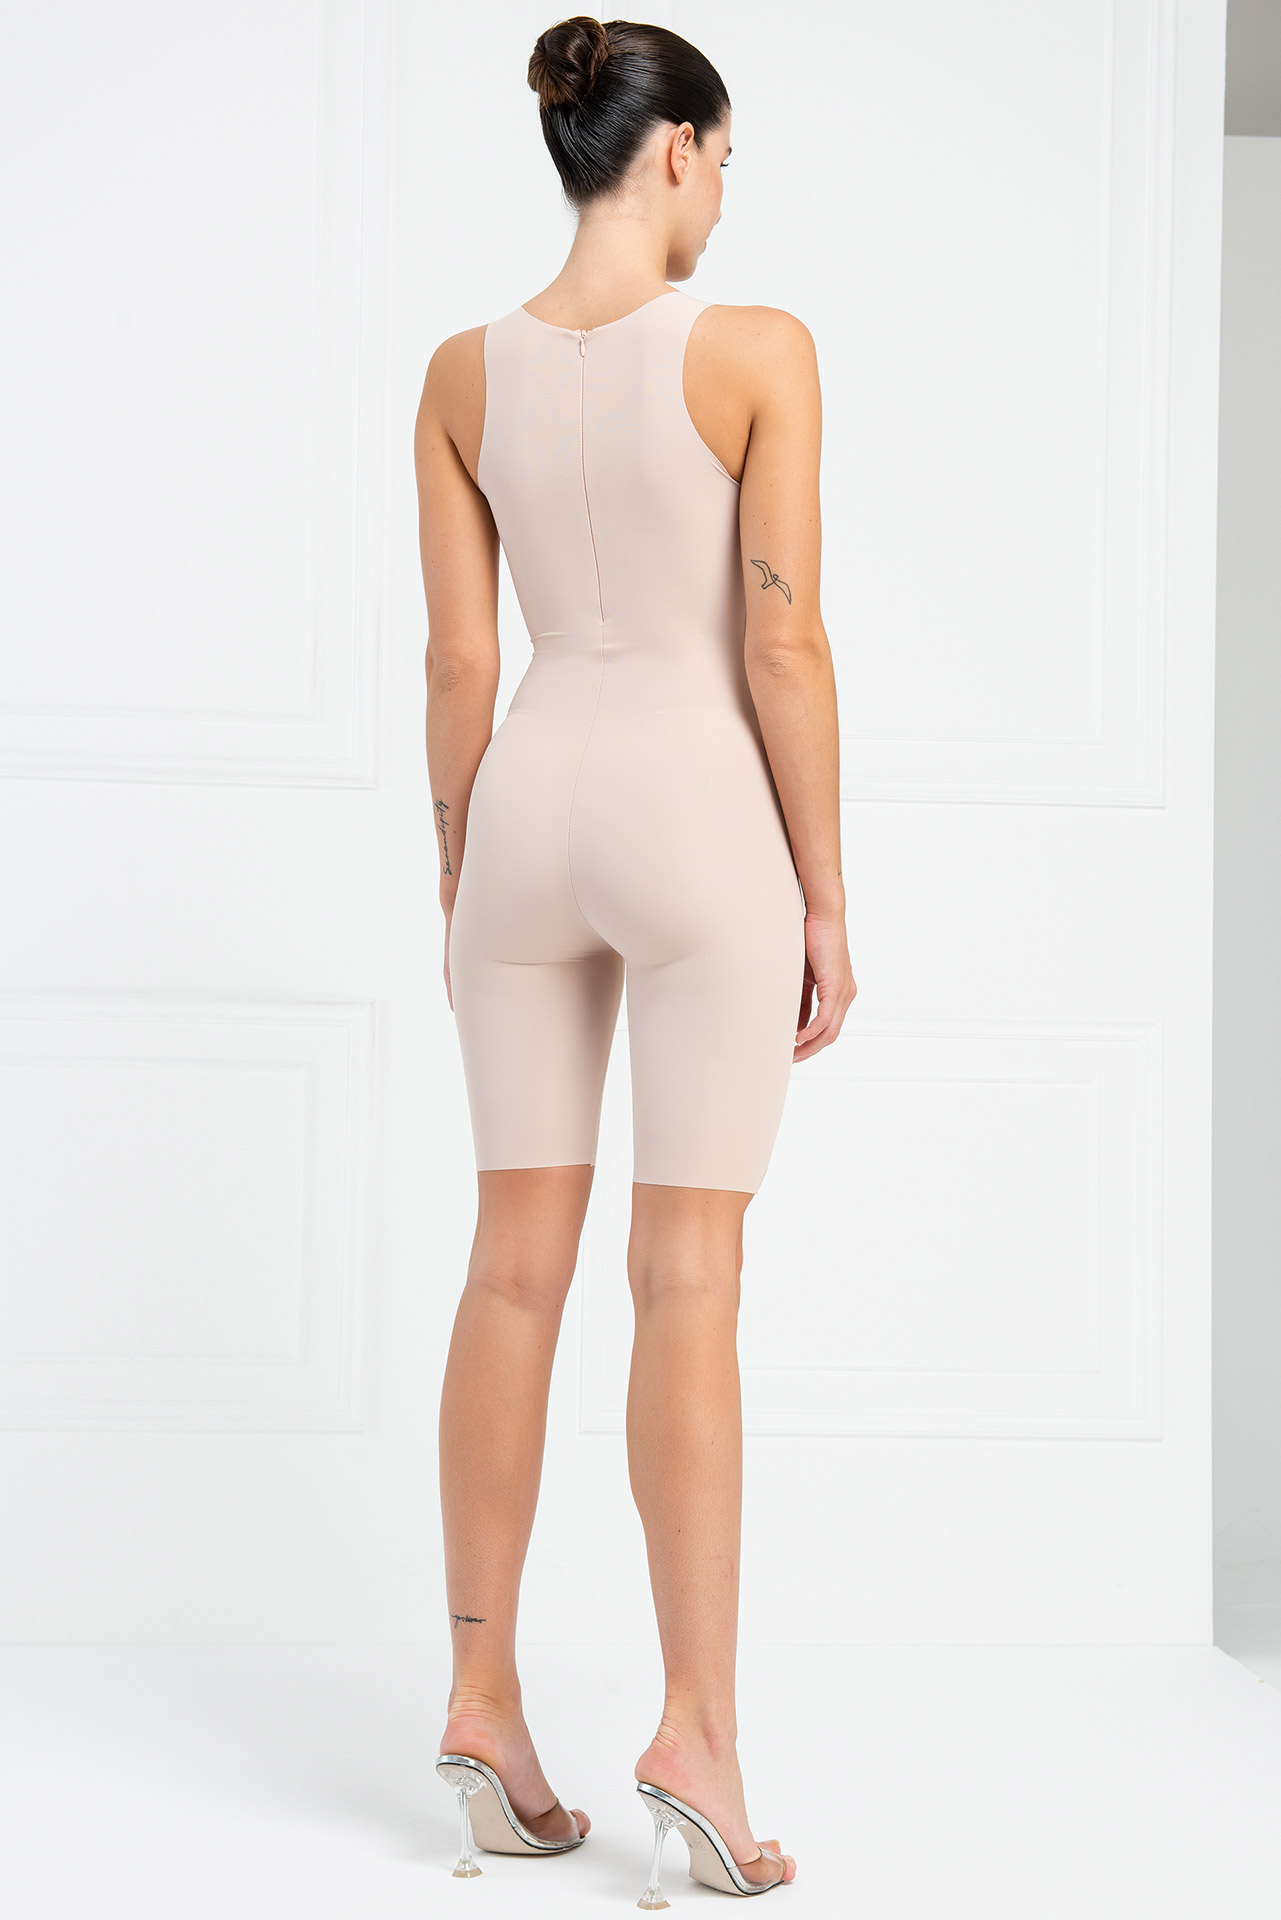 Wholesale Scoop Neck Mid Thigh Full Body Shaper in Nude